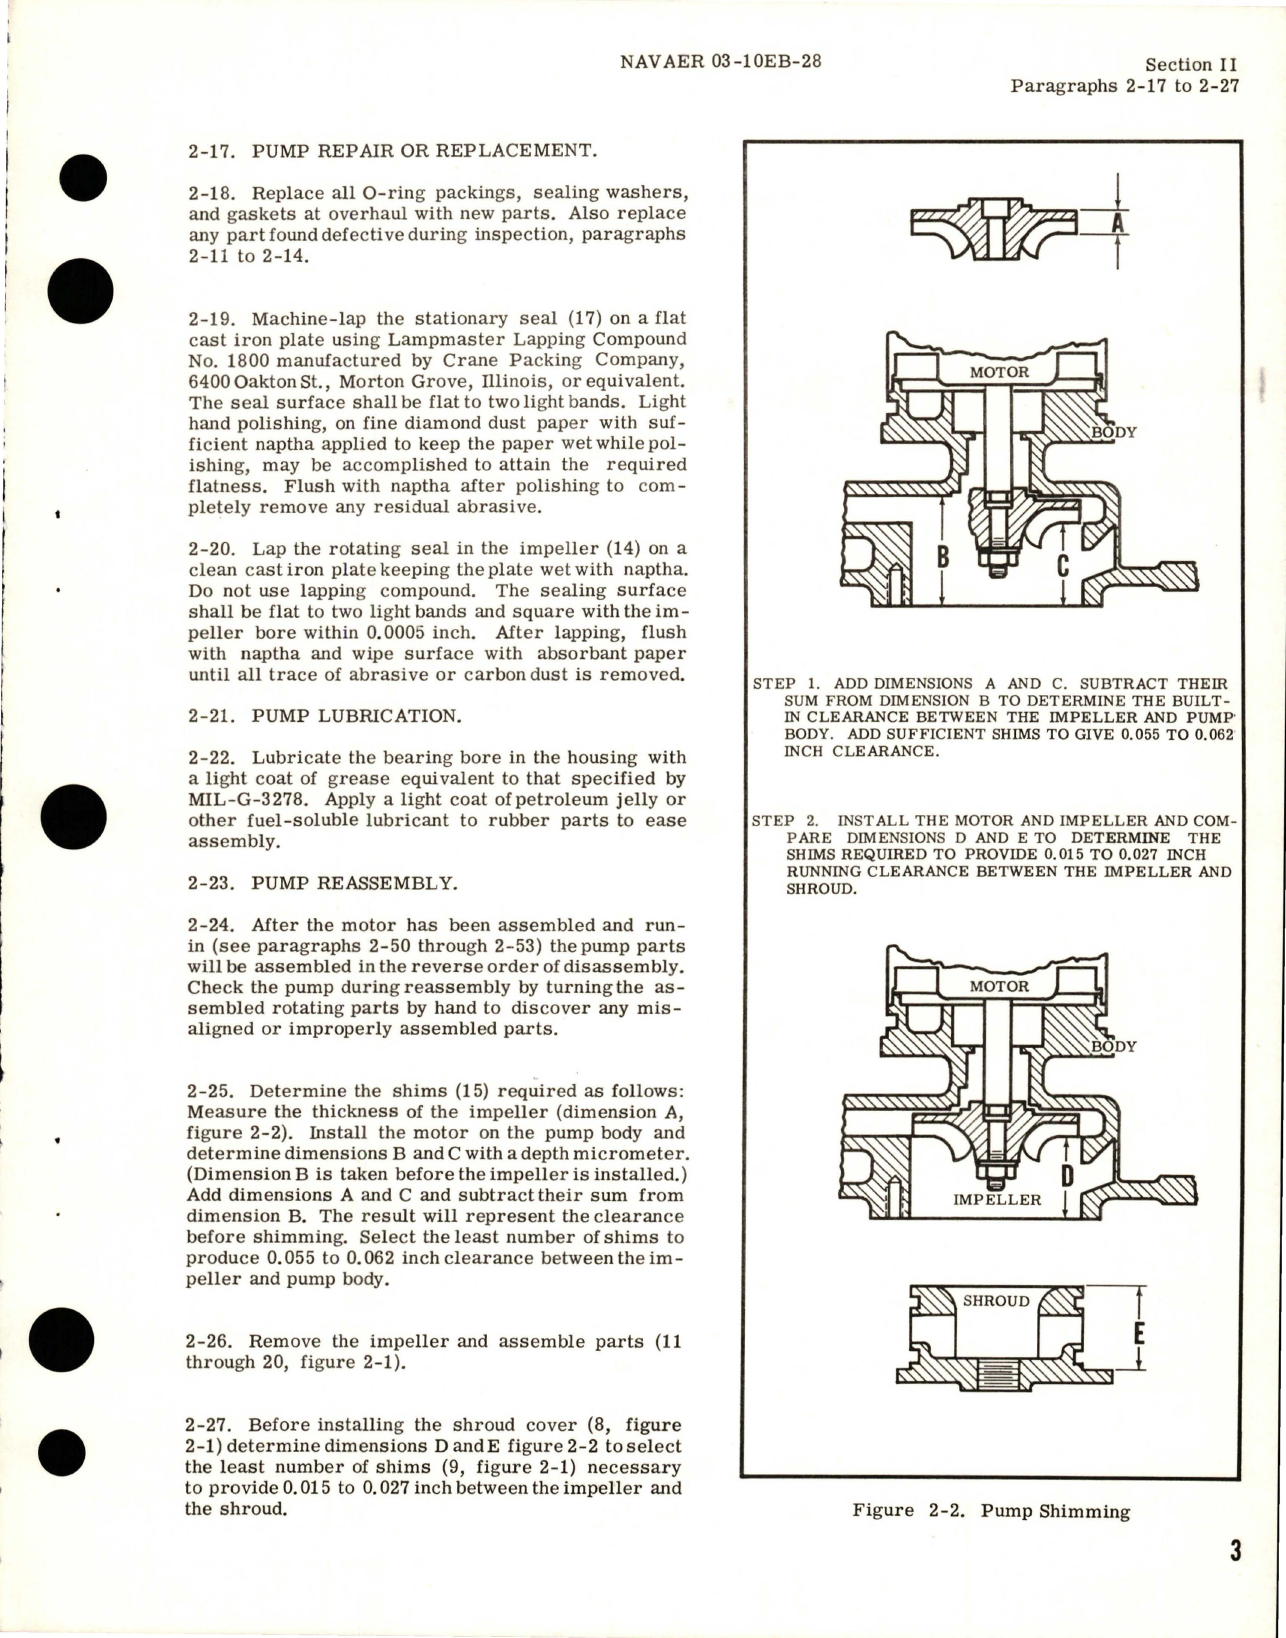 Sample page 7 from AirCorps Library document: Overhaul Instructions for Fuel Booster Pump - RG11260, RG11260A1, and RG11260A3